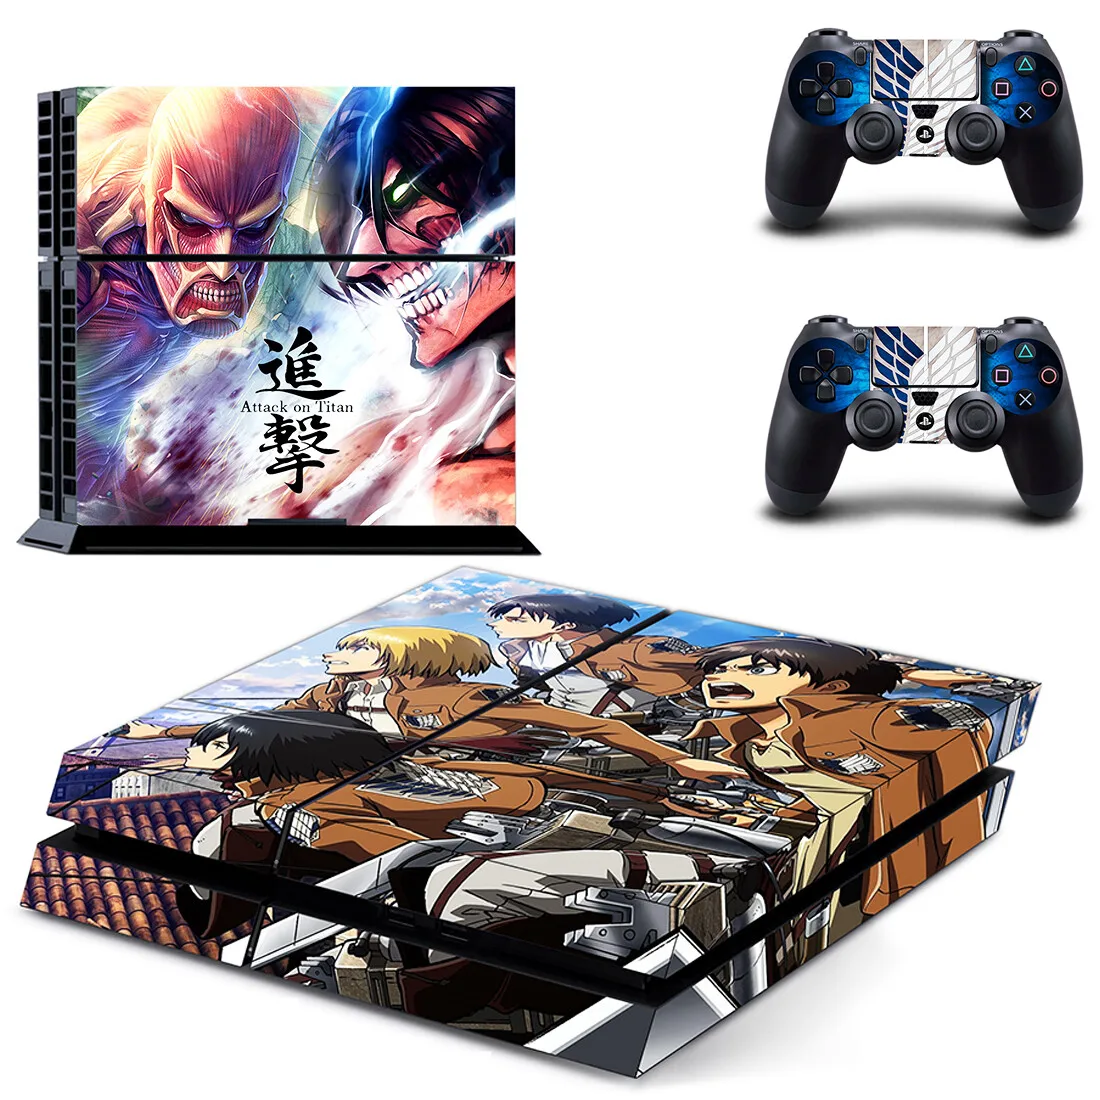 

Attack On Titan Shingeki no Kyojin PS4 Skin Sticker Decal Cover For PlayStation 4 PS4 Console & Controller Skins Vinyl